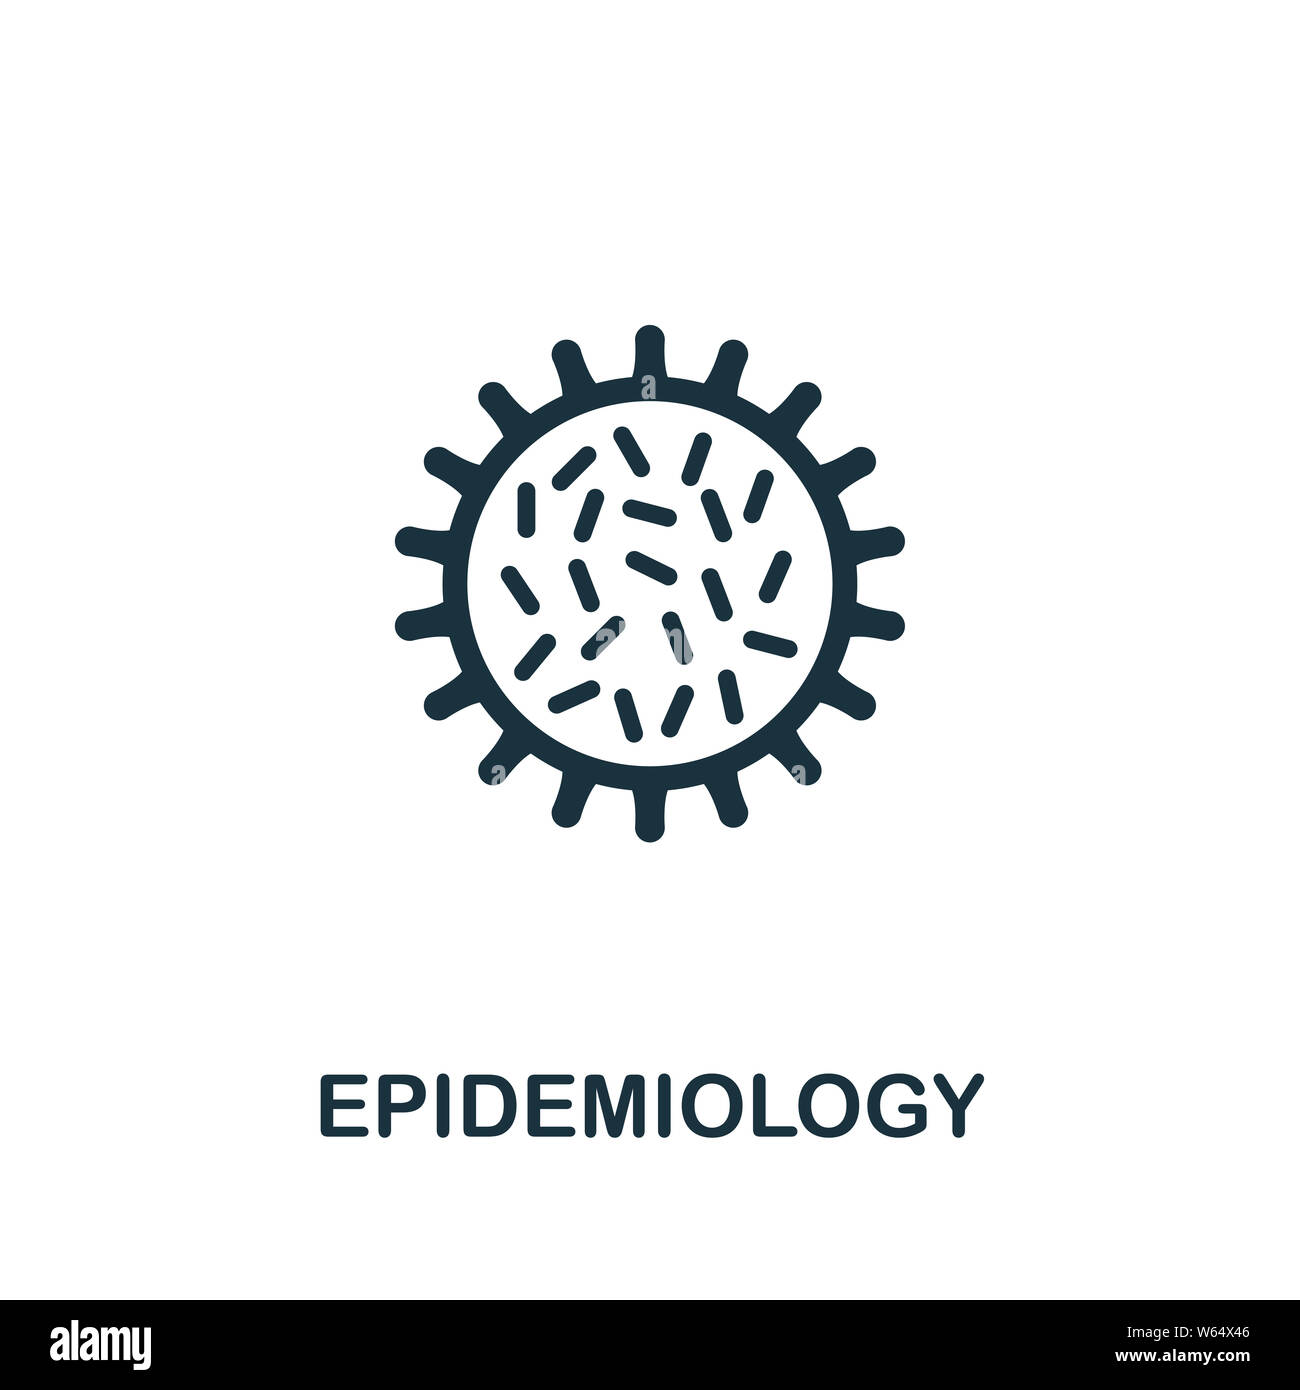 Epidemiology icon symbol. Creative sign from science icons collection. Filled flat Epidemiology icon for computer and mobile Stock Photo